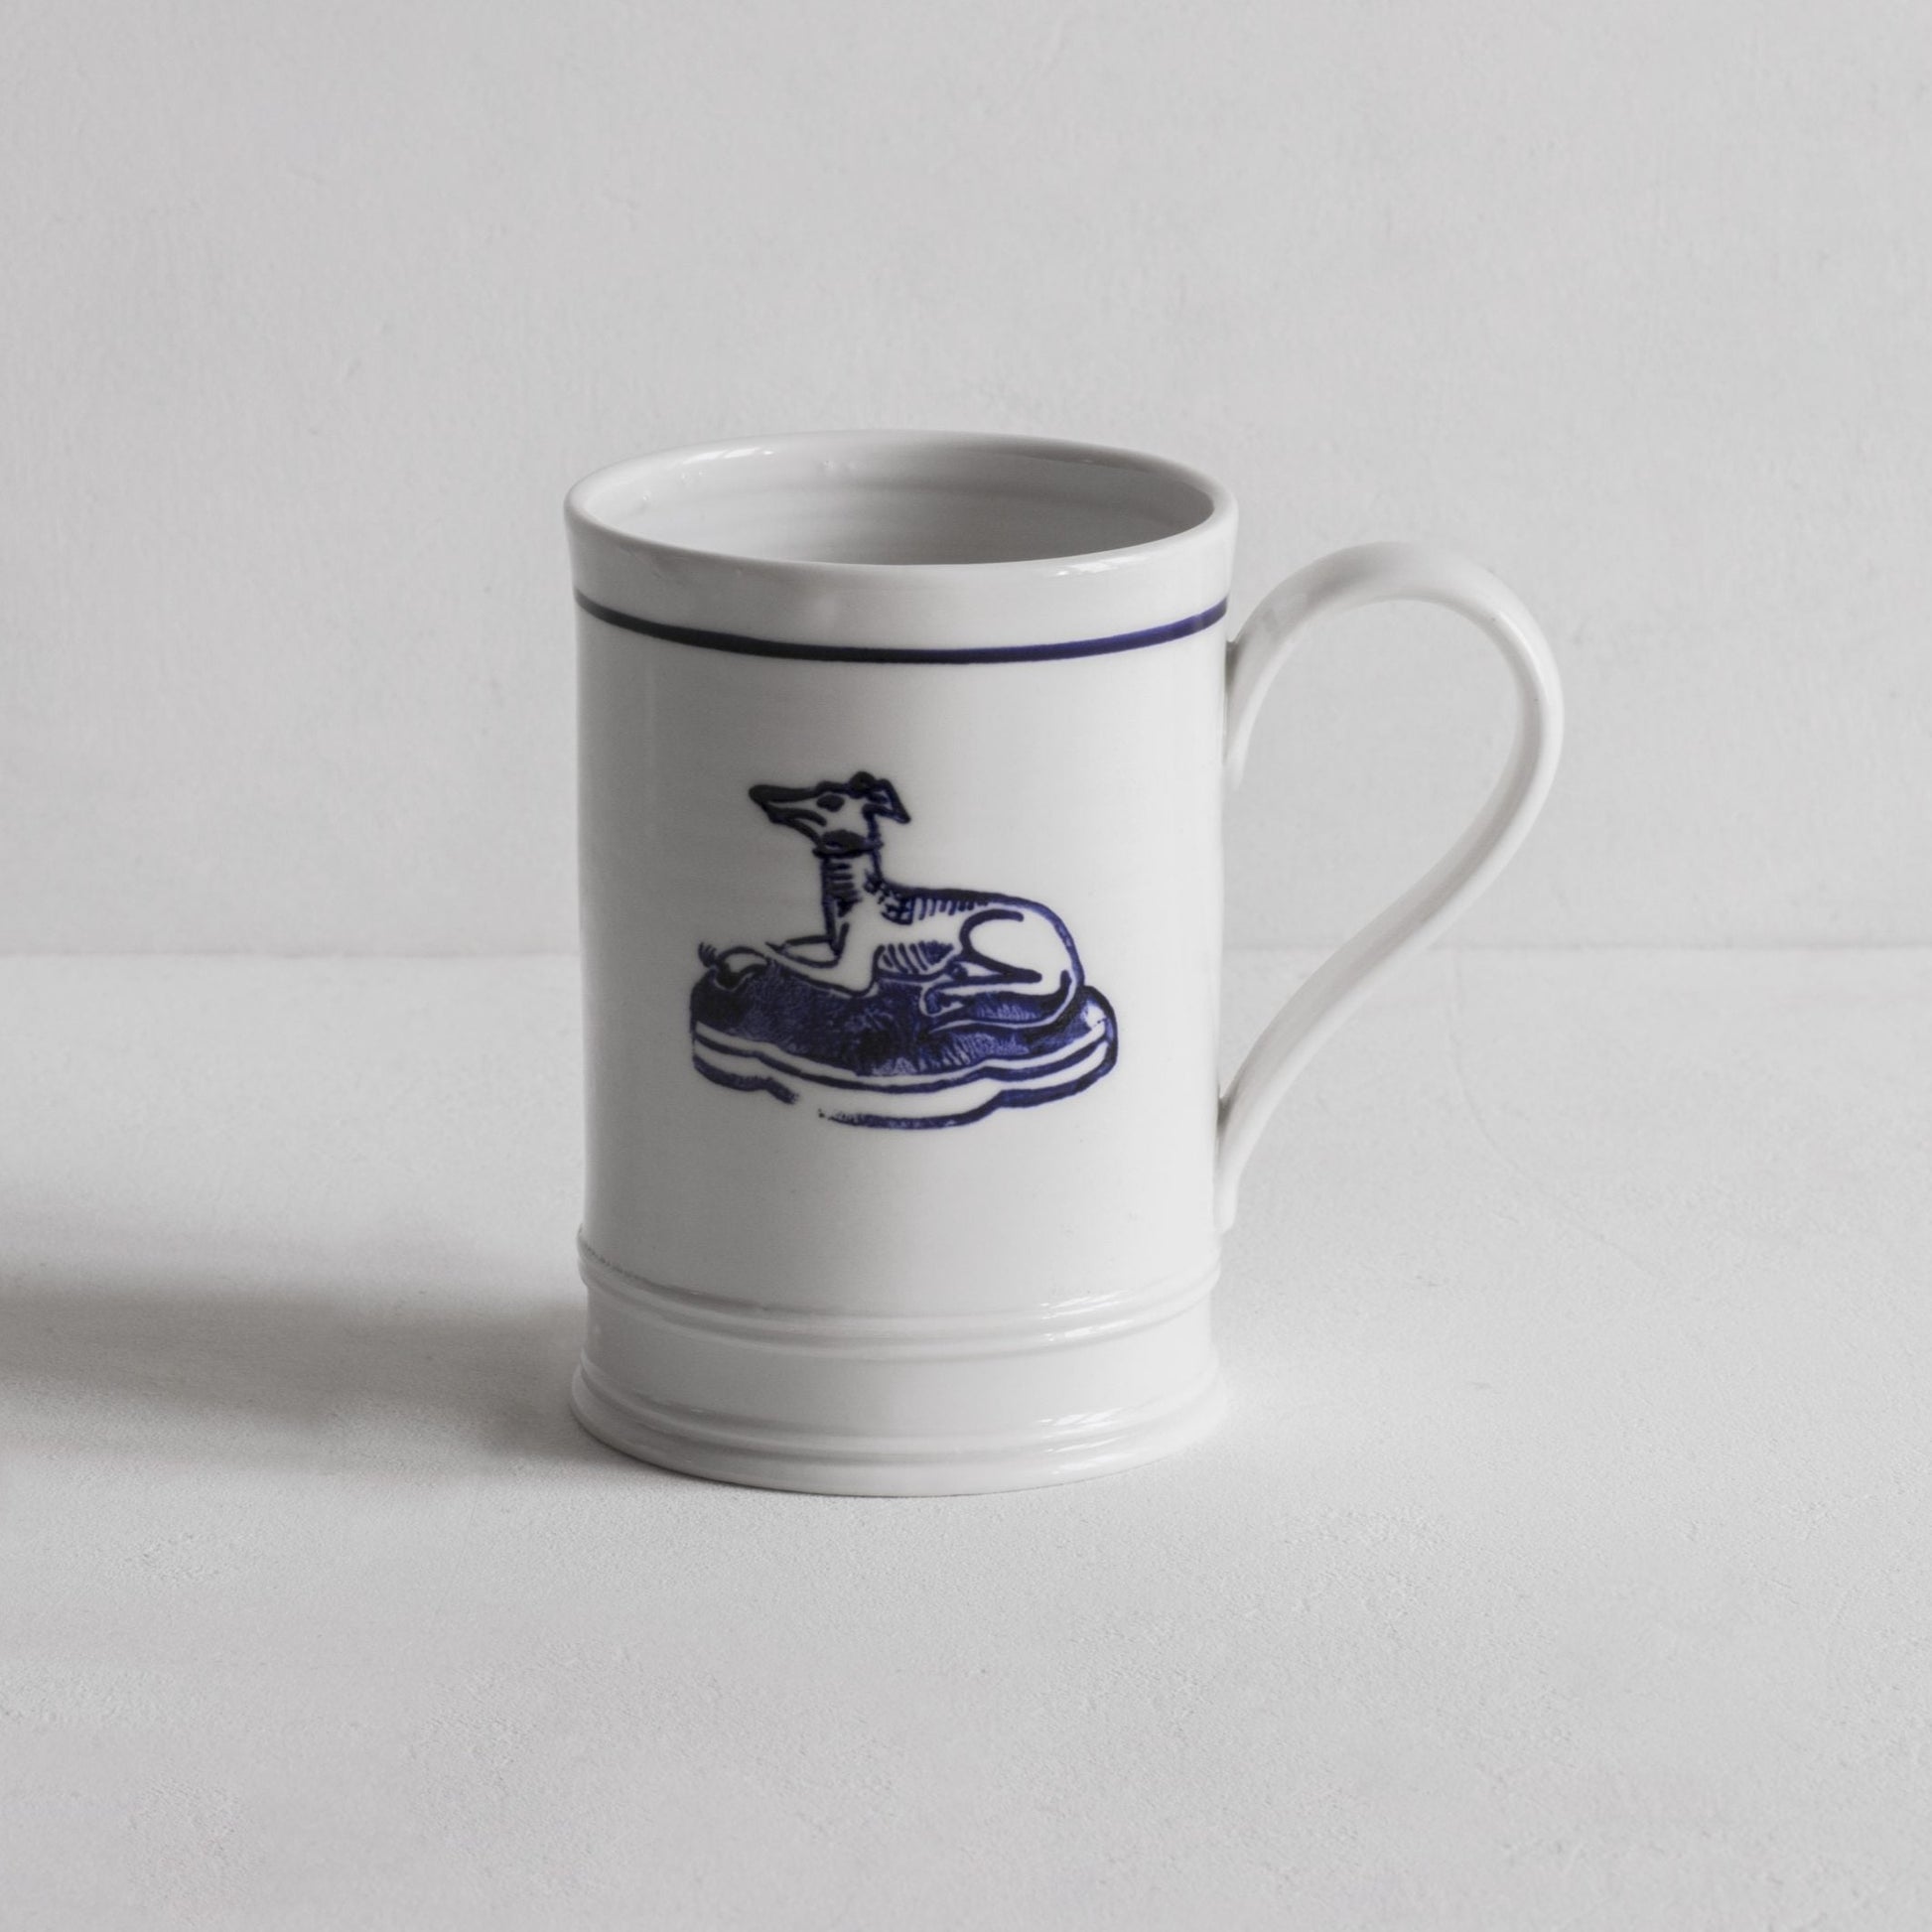 Classical Mug with Blue Line and Hound | Pottery Gifts | Handmade